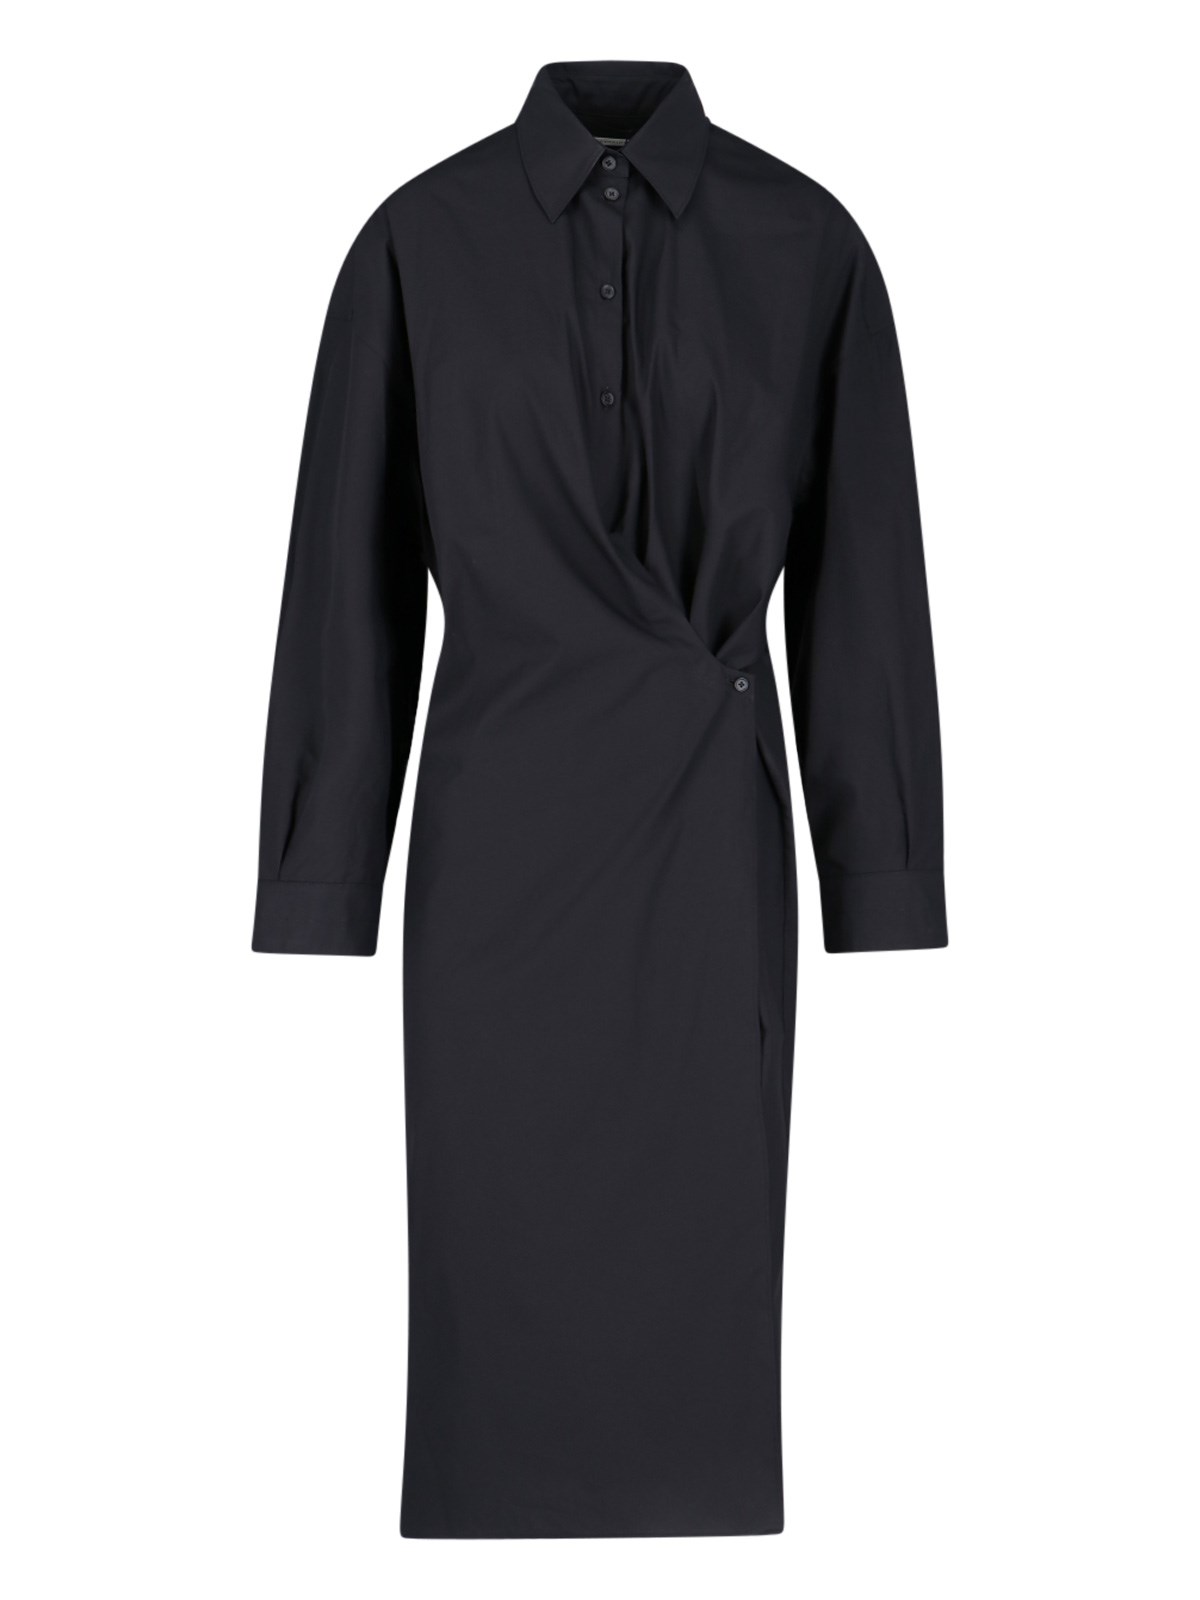 LEMAIRE ‘OFFICER COLLAR TWISTED' DRESS